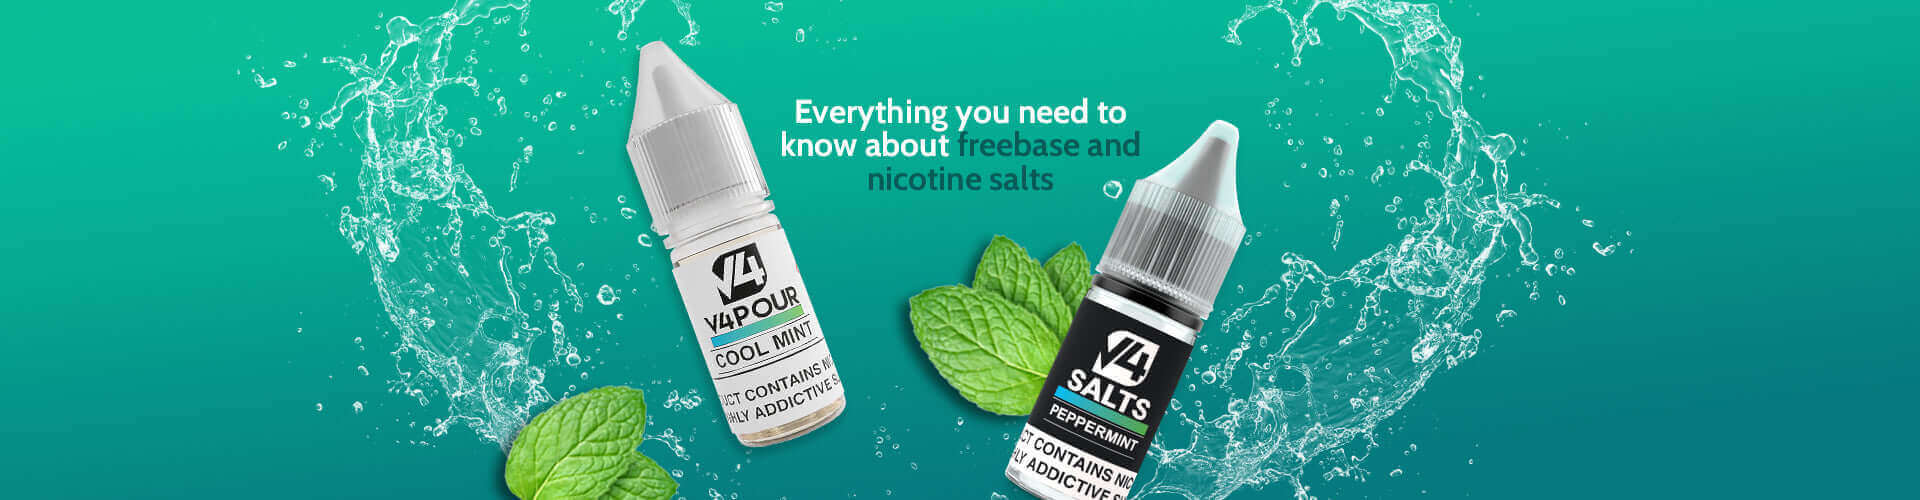 Everything you need to know about freebase and nicotine salts - 888 Vapour